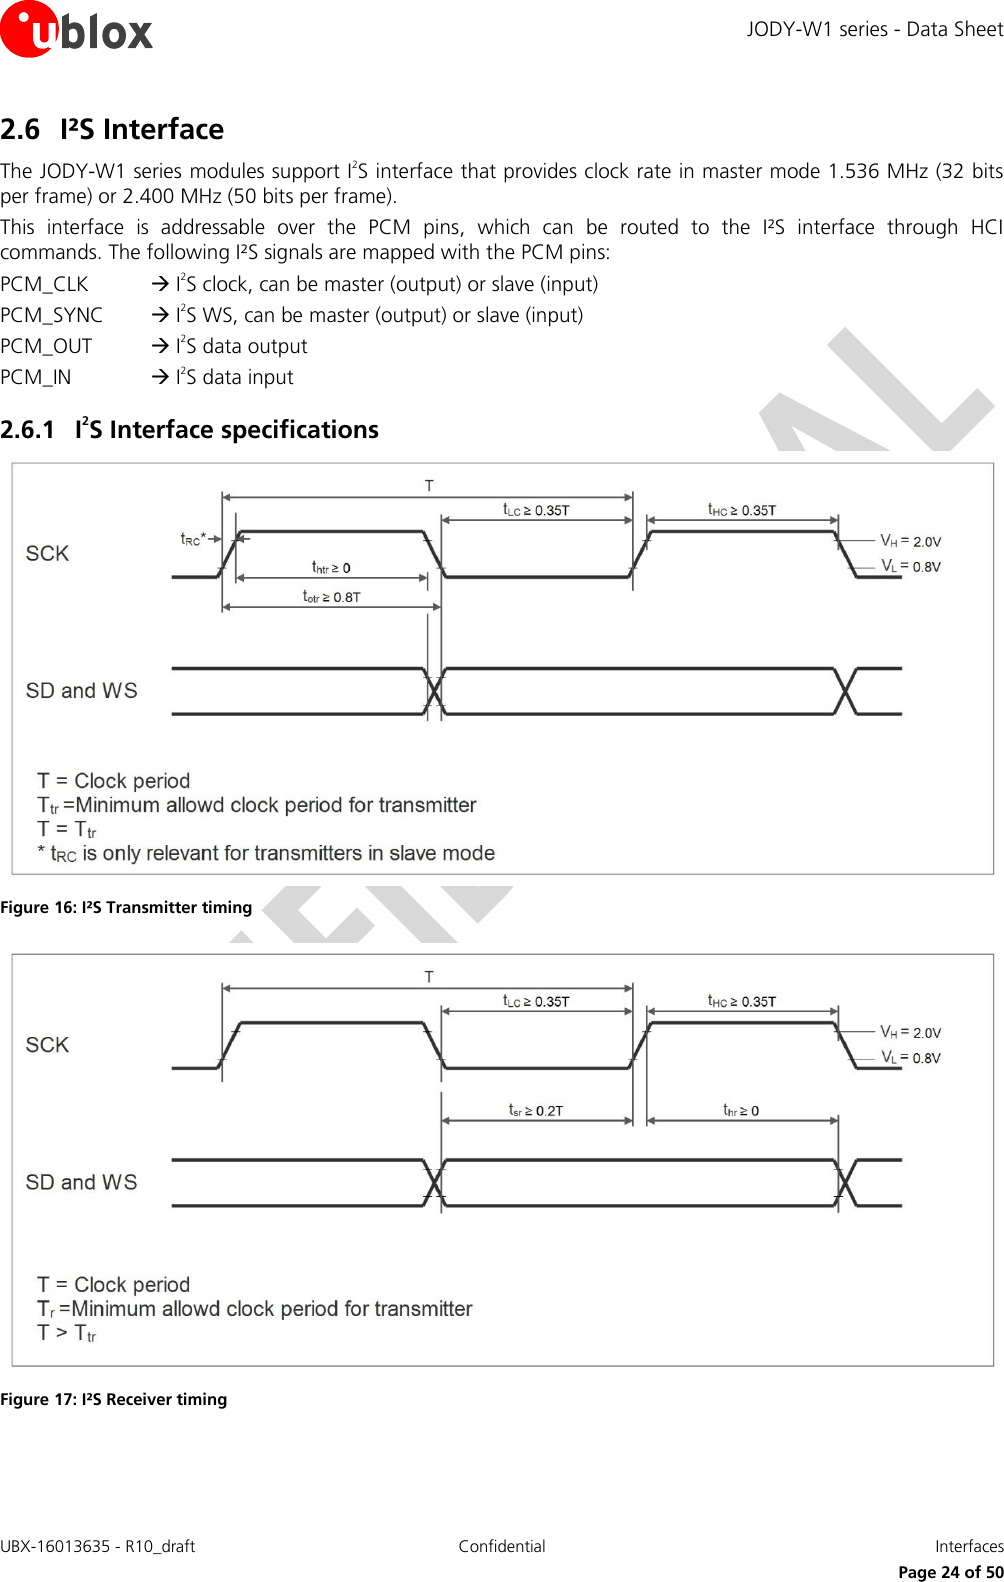 JODY-W1 series - Data Sheet UBX-16013635 - R10_draft Confidential  Interfaces     Page 24 of 50 2.6 I²S Interface The JODY-W1 series modules support I2S interface that provides clock rate in master mode 1.536 MHz (32 bits per frame) or 2.400 MHz (50 bits per frame). This  interface  is  addressable  over  the  PCM  pins,  which  can  be  routed  to  the  I²S  interface  through  HCI commands. The following I²S signals are mapped with the PCM pins:  PCM_CLK   I2S clock, can be master (output) or slave (input)  PCM_SYNC   I2S WS, can be master (output) or slave (input) PCM_OUT   I2S data output PCM_IN    I2S data input 2.6.1 I2S Interface specifications  Figure 16: I²S Transmitter timing  Figure 17: I²S Receiver timing   